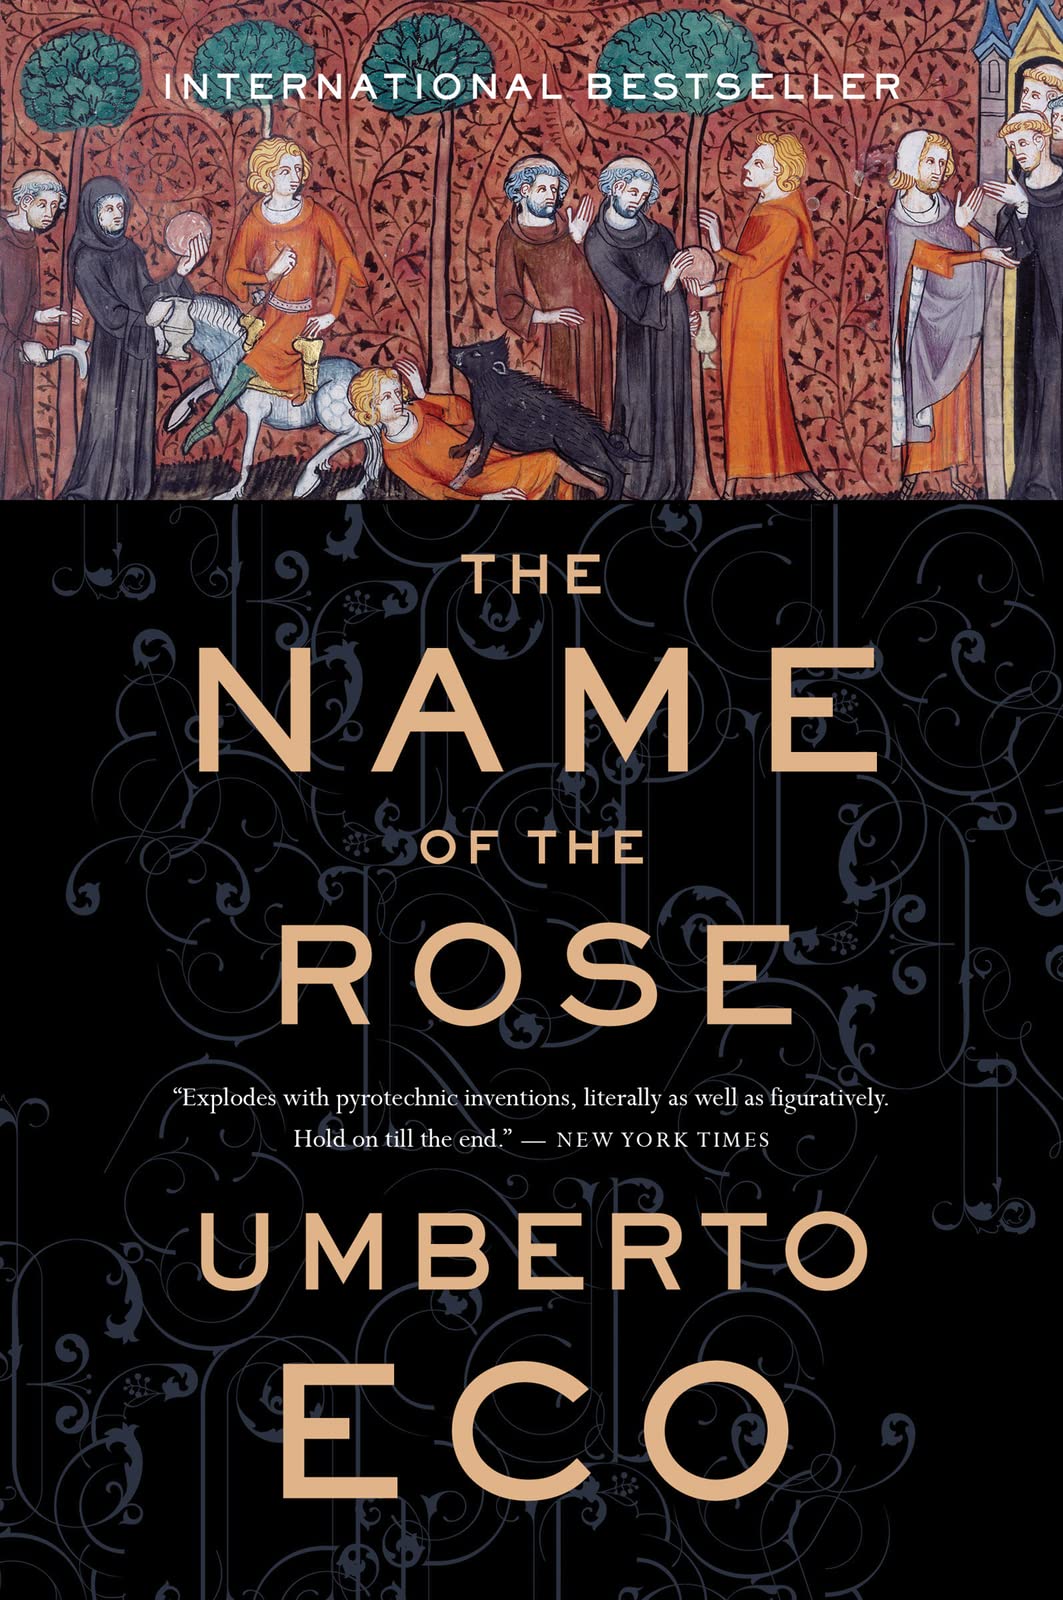 The Name of the Rose, by Umberto Eco